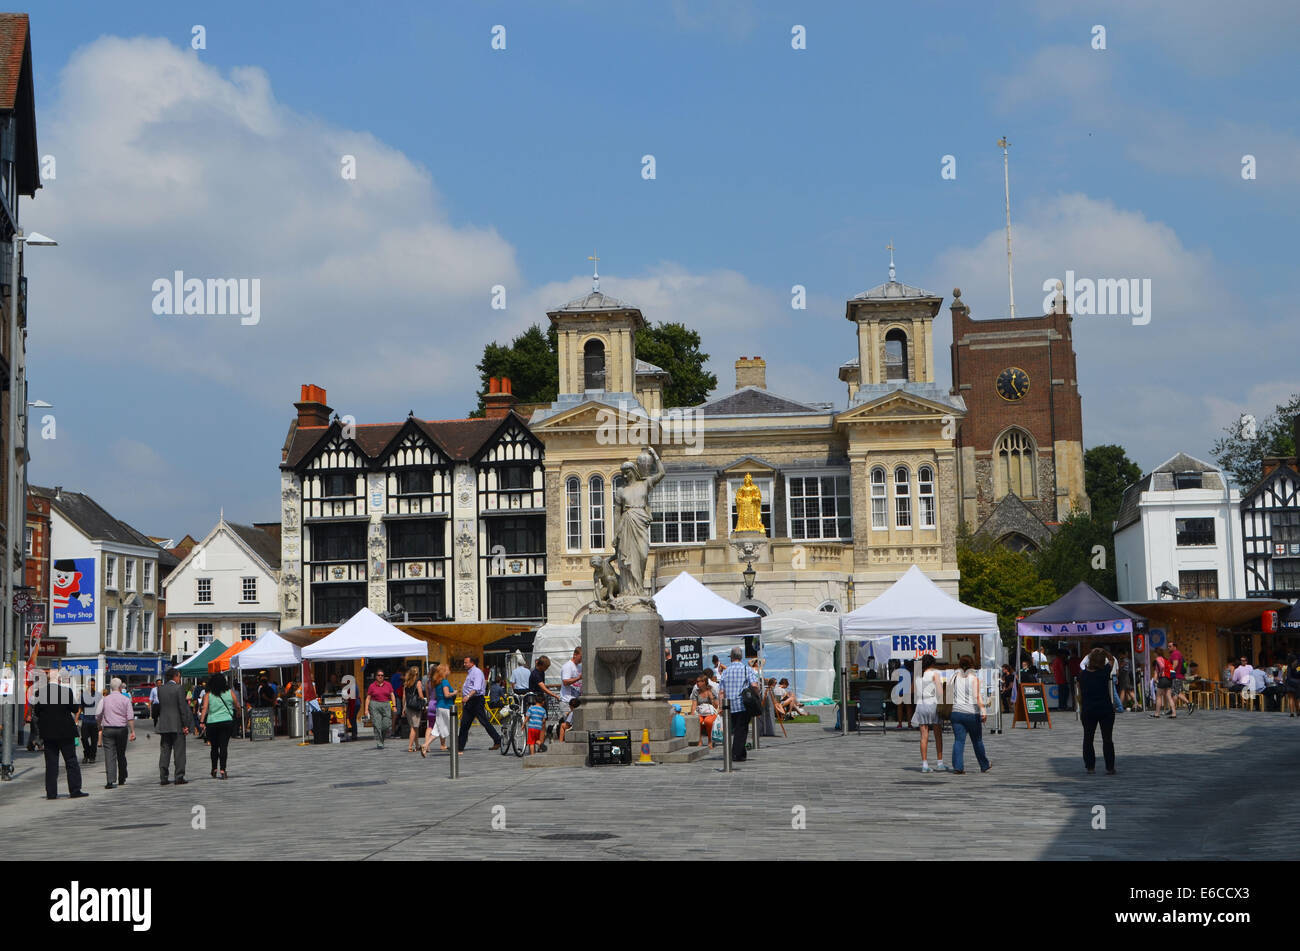 RoyalBorough KingstononThames marketplace with its ancient buildings and street marketeers gets ready for aday of selling&buying Stock Photo